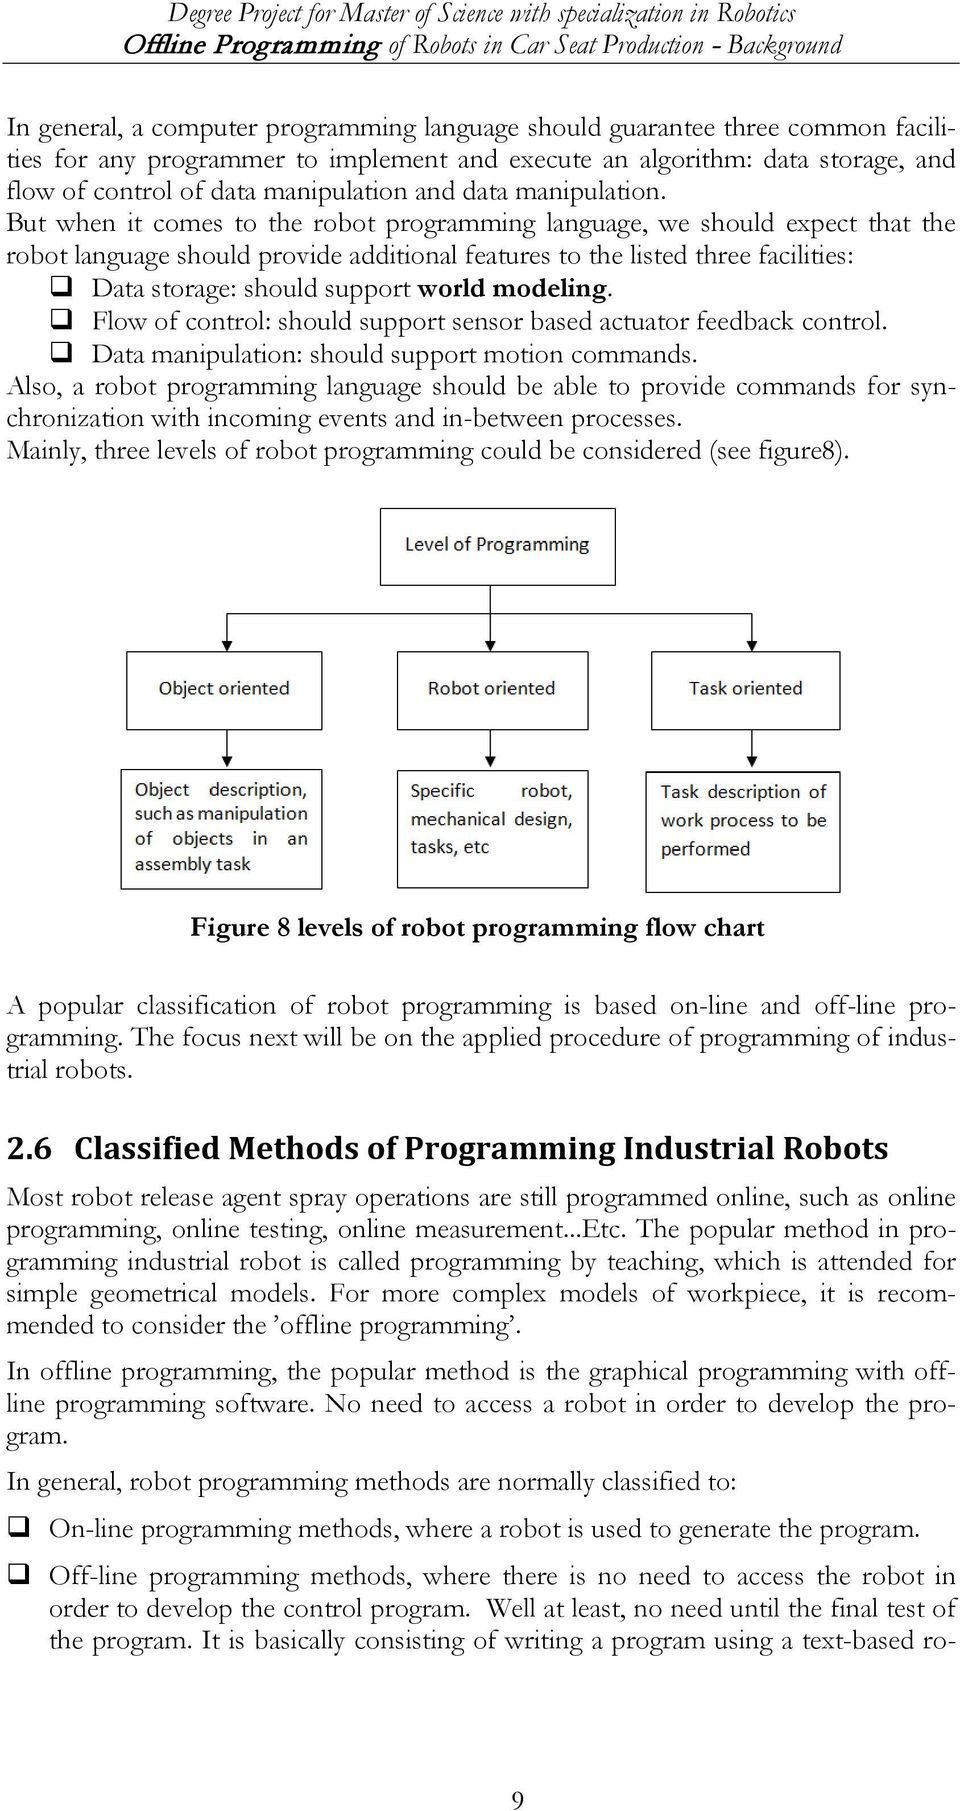 But when it comes to the robot programming language, we should expect that the robot language should provide additional features to the listed three facilities: Data storage: should support world